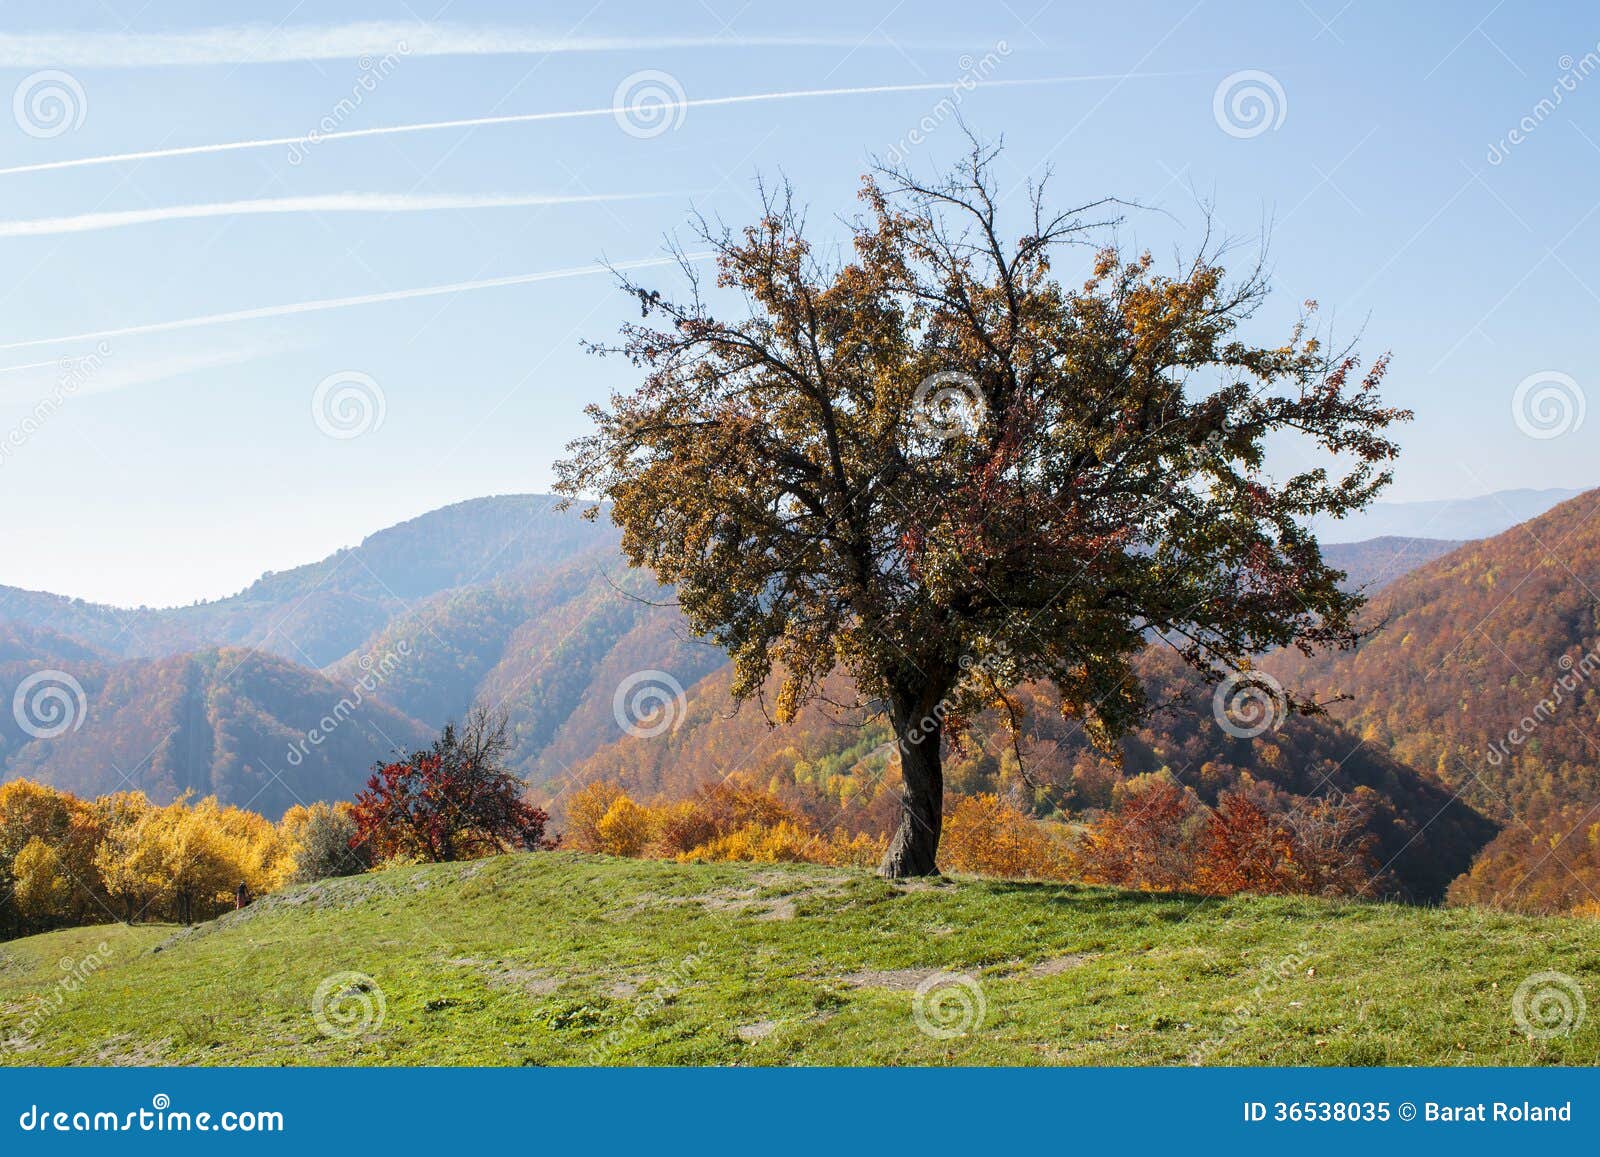 lonely tree on a hill